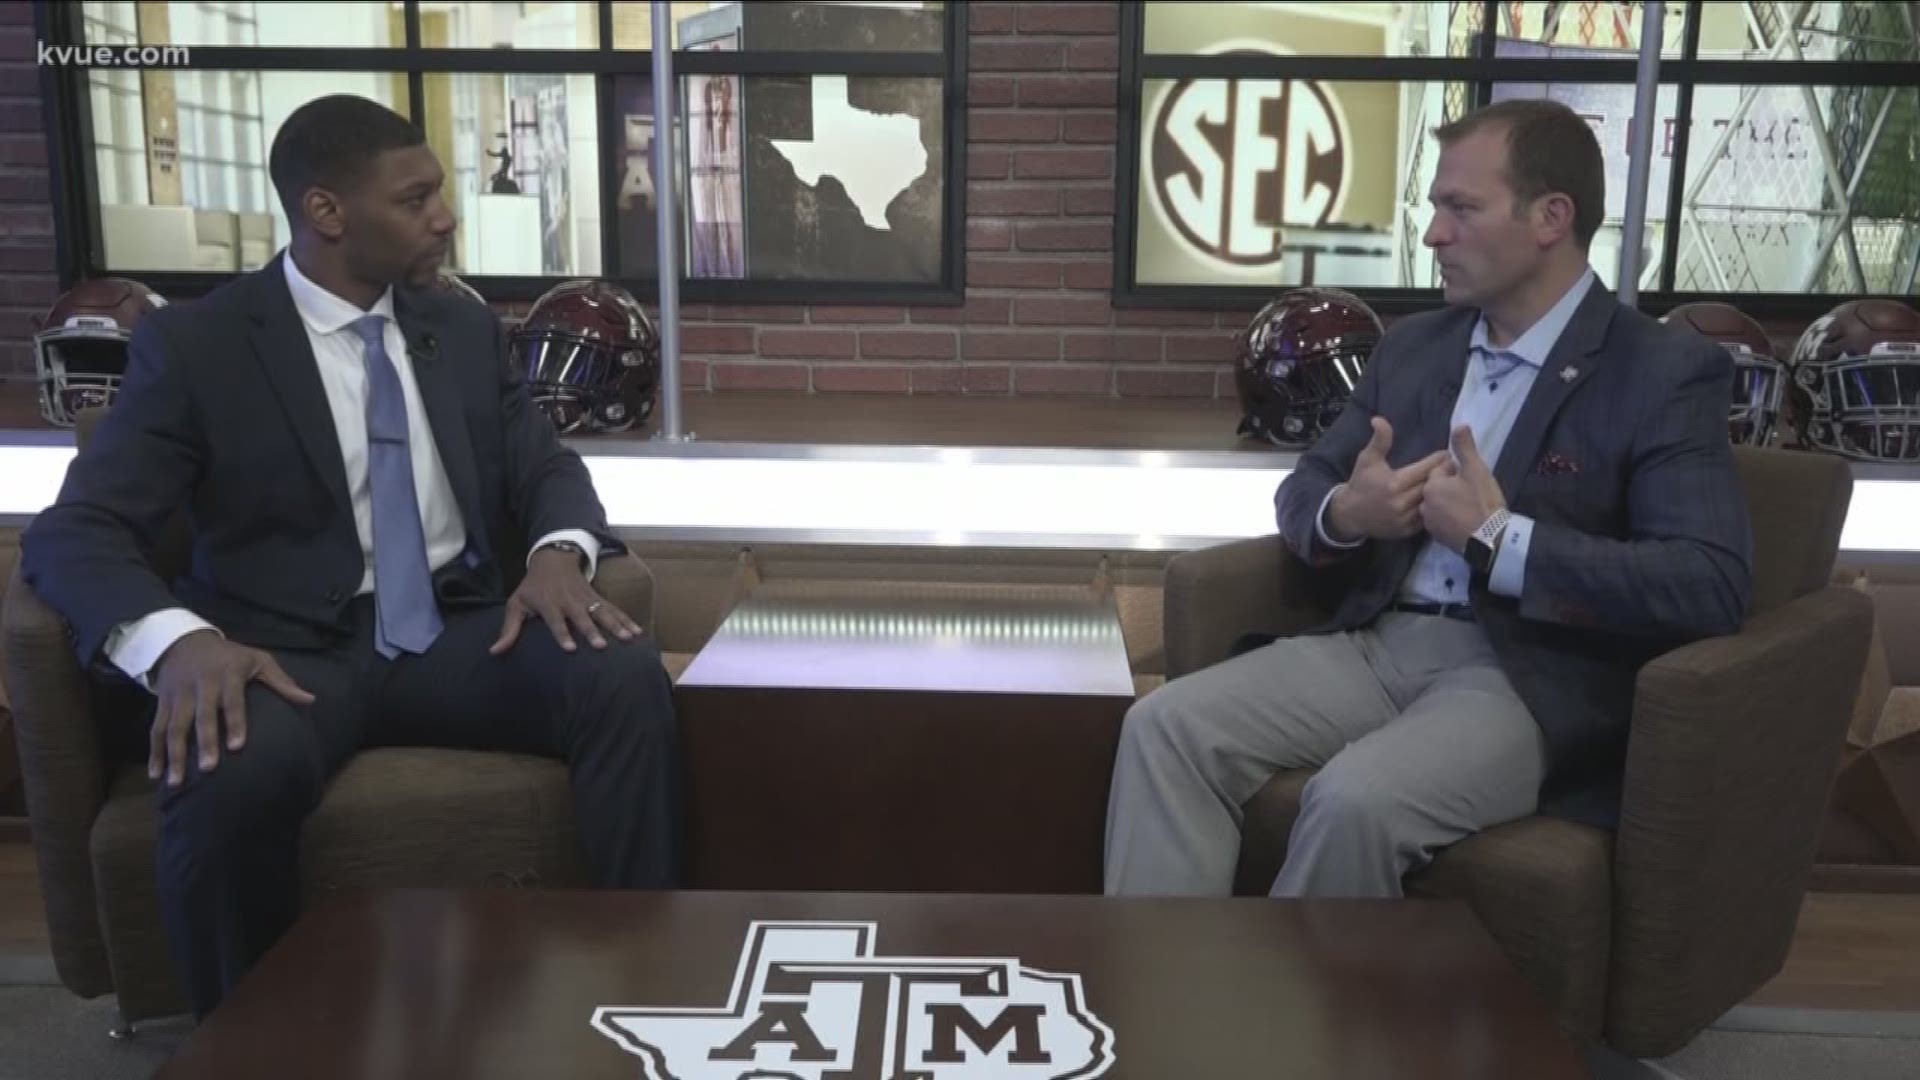 KVUE Sports Director Jeff Jones sat down with Texas A&M AD Ross Bjork to break down why the schools have gone their separate ways.